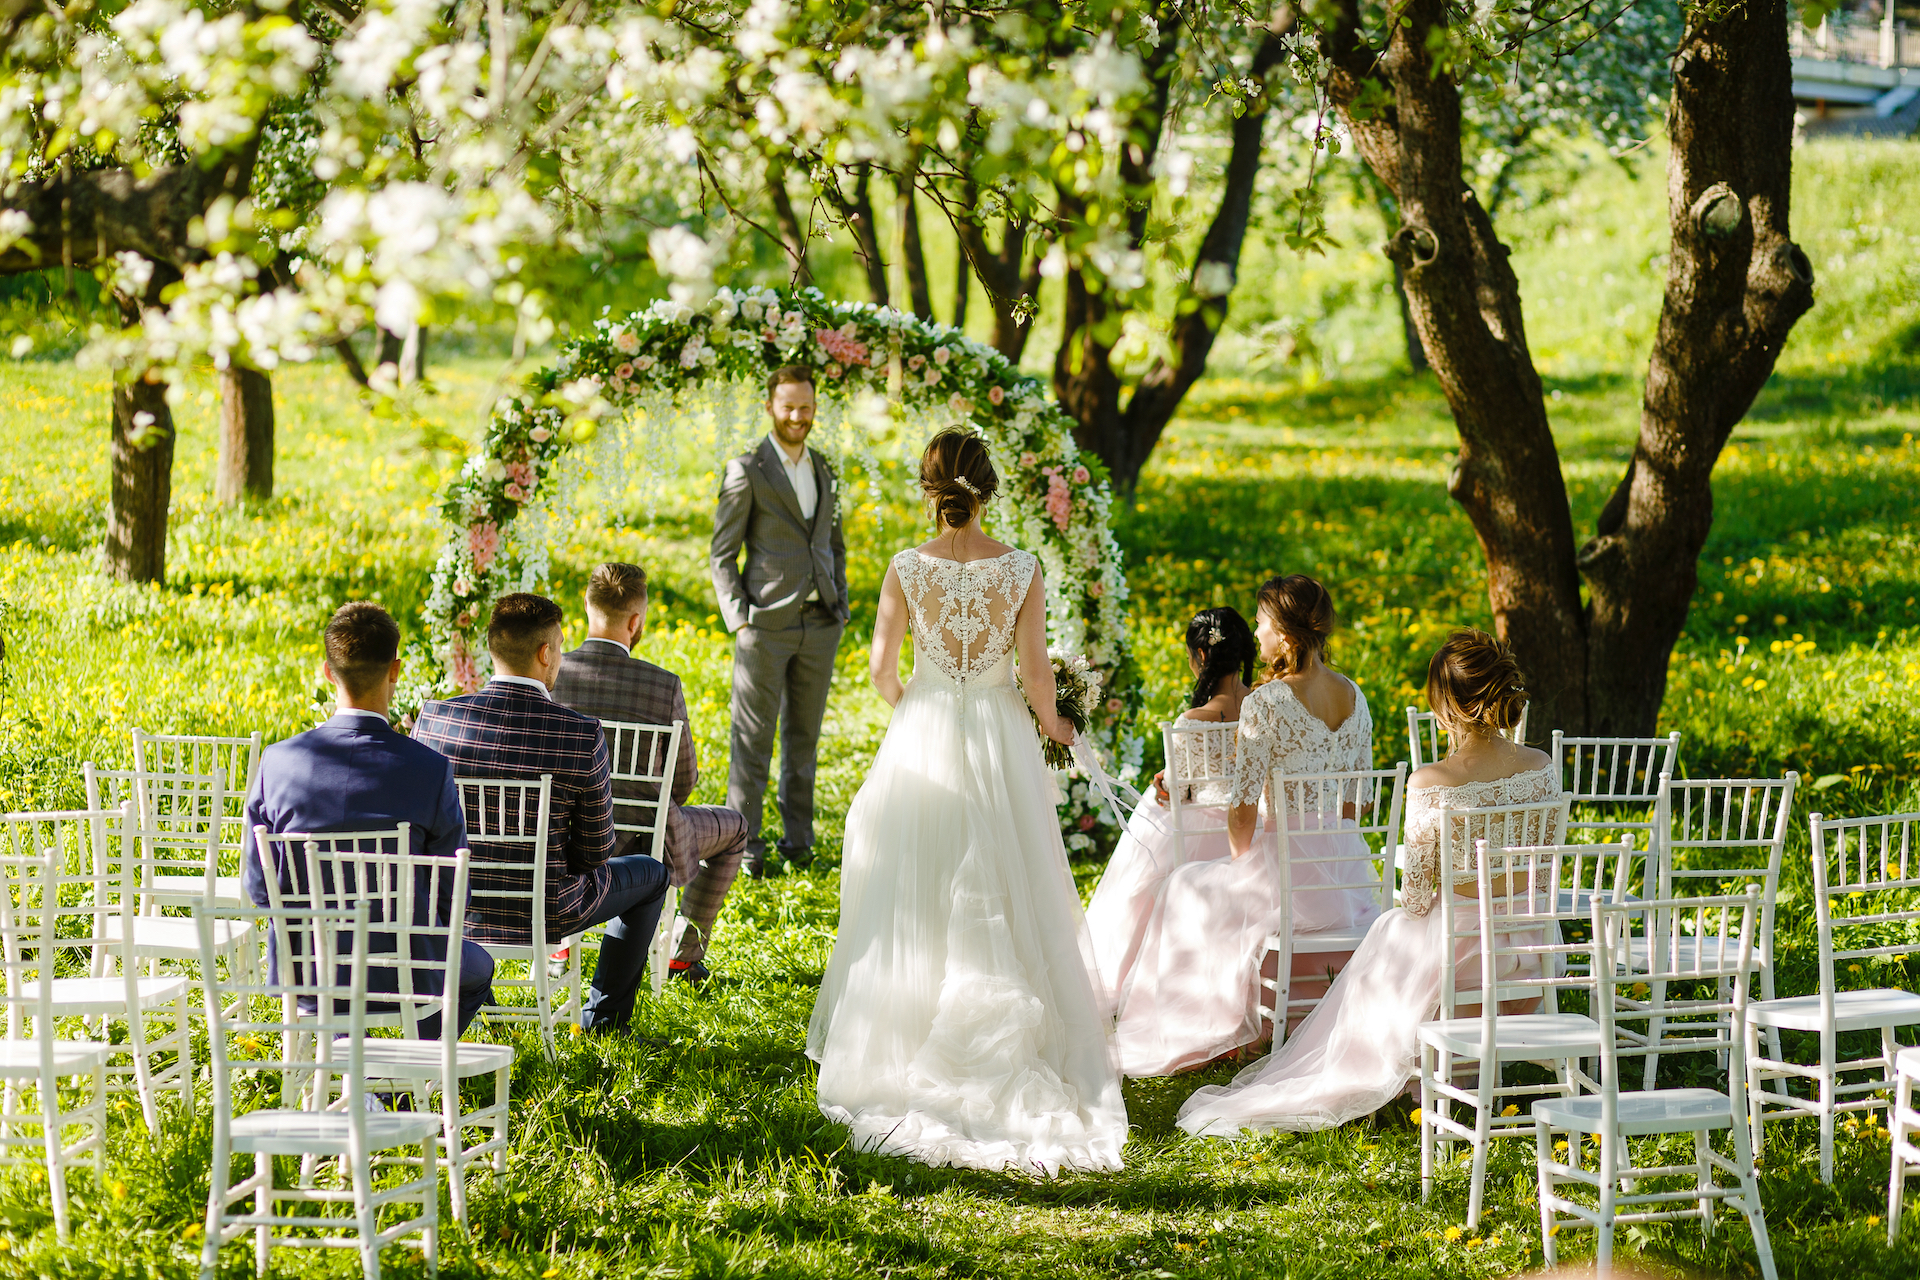 A wedding in nature with lush vegitation for the Bella Mansions Wedding Venue blog